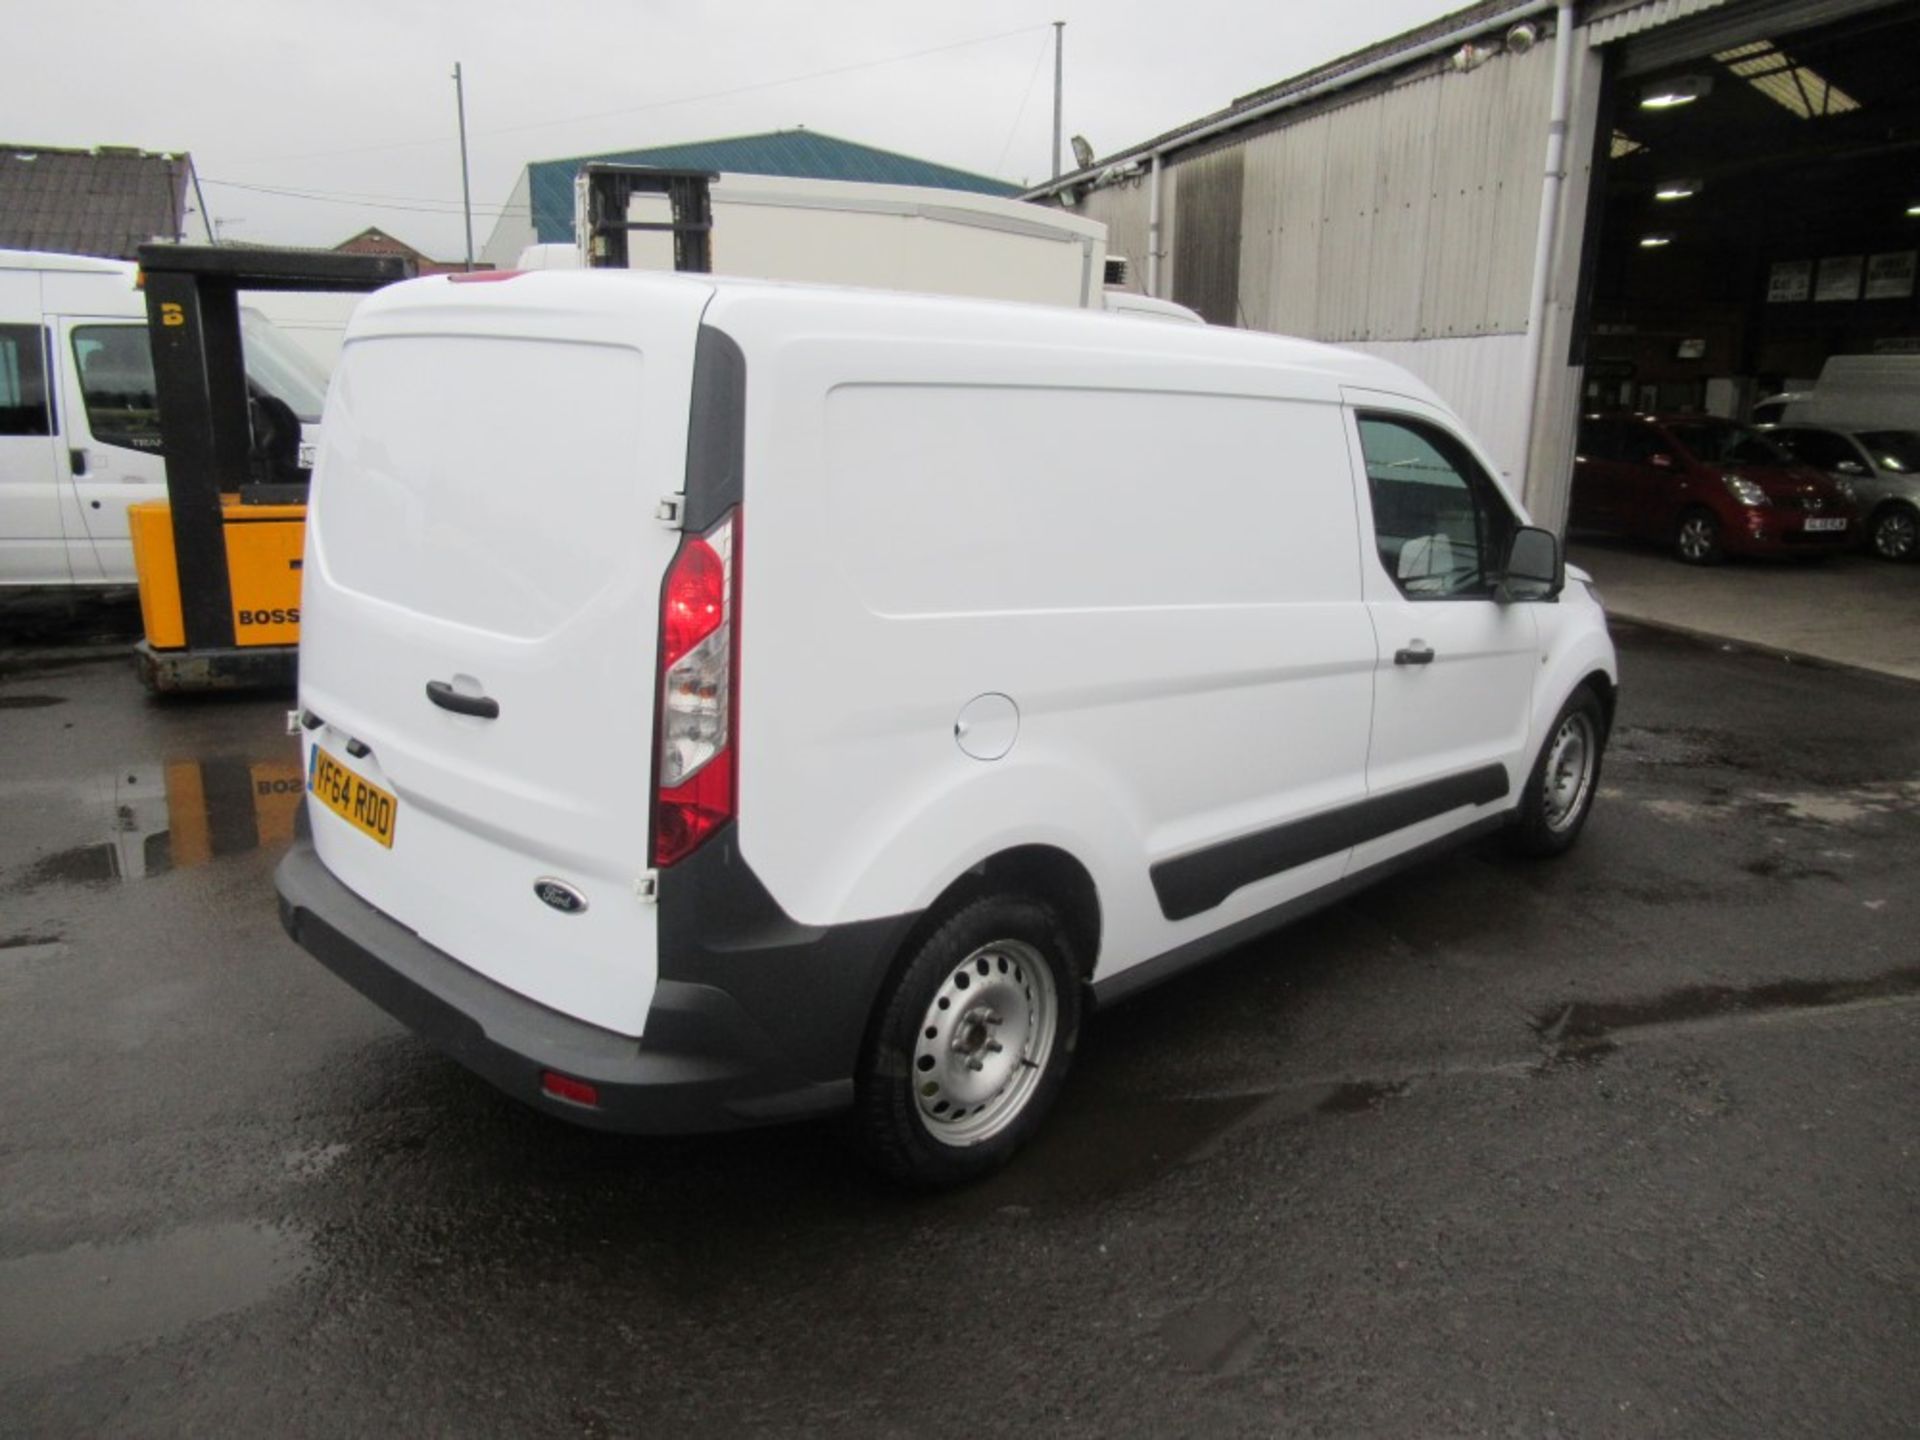 64 reg FORD TRANSIT CONNECT 210 ECO-TECH, 1ST REG 01/15, TEST 01/20, 108763M WARRANTED, V5 HERE, 1 - Image 4 of 6